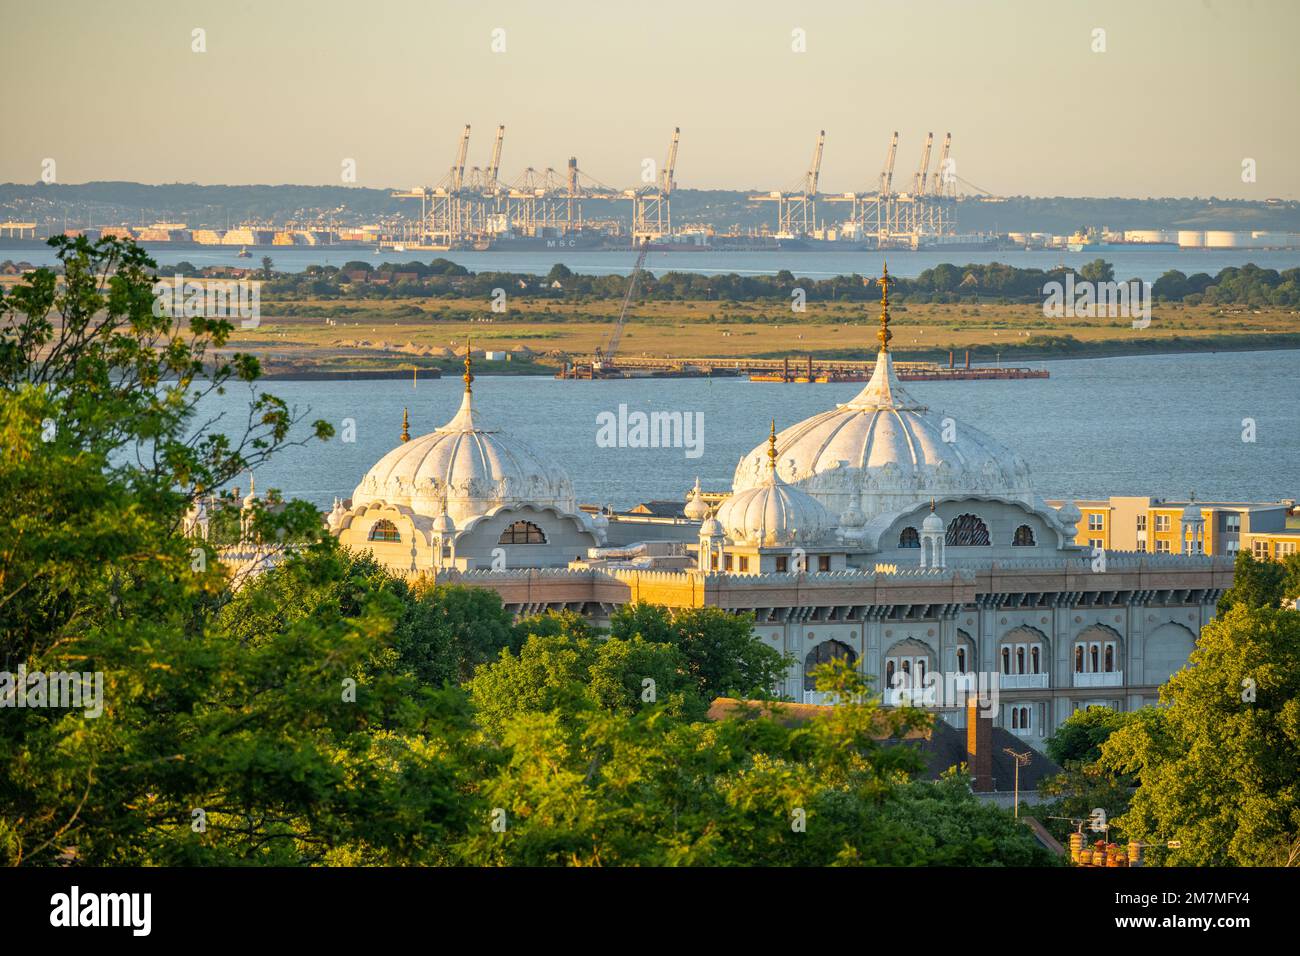 The cranes London Gateway port from Gravesend Kent with the dogs of the Sikh temple in the foreground at sunset Stock Photo